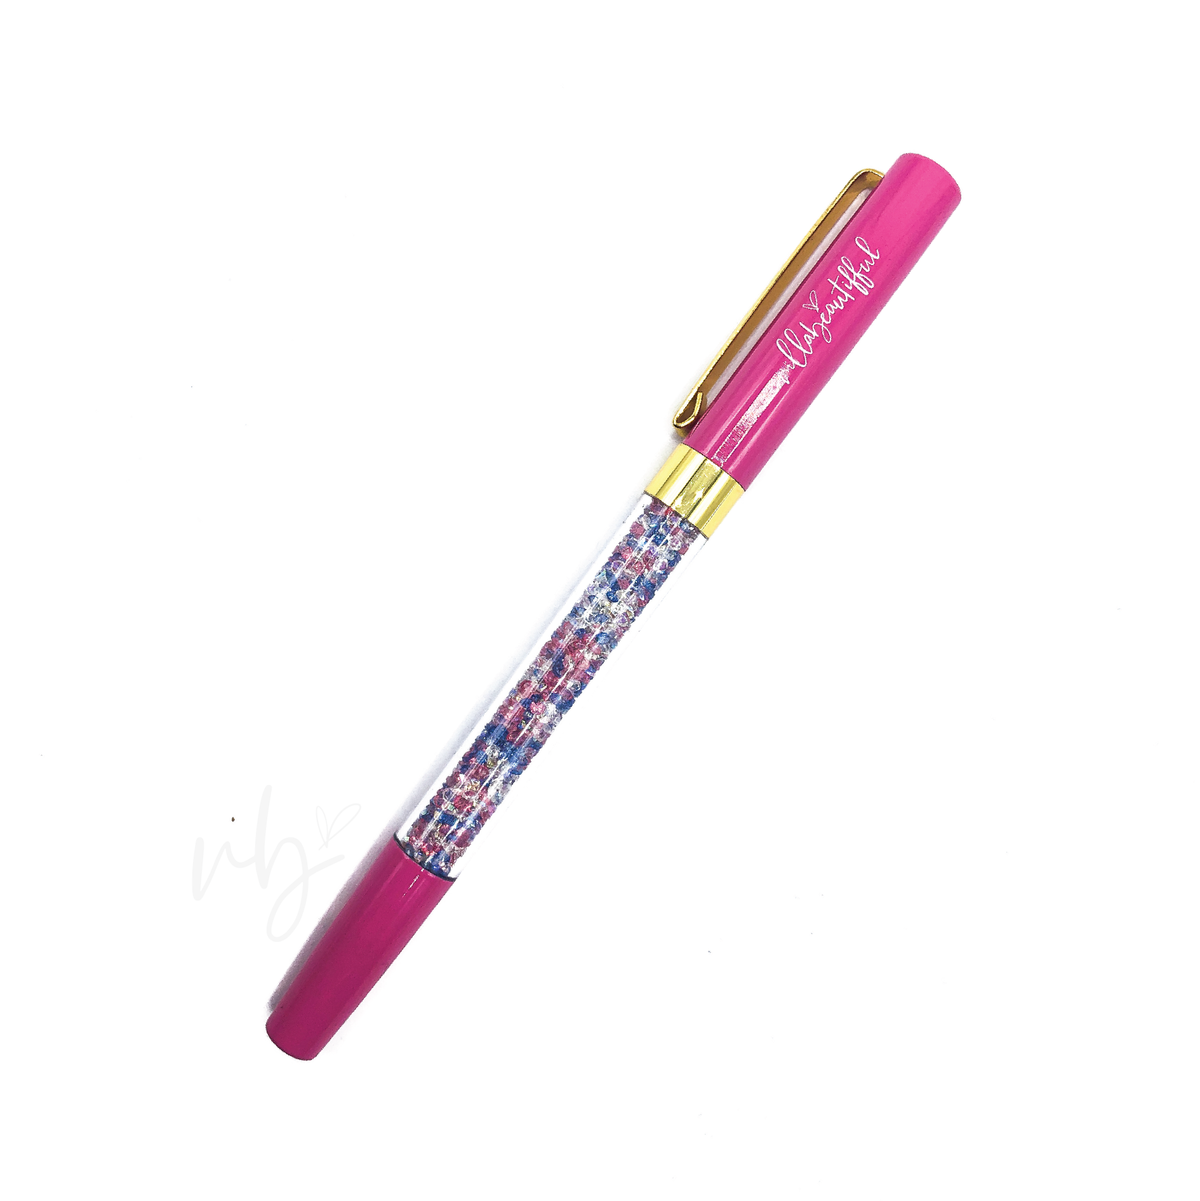 Aurora Imperfect Crystal VBPen | limited